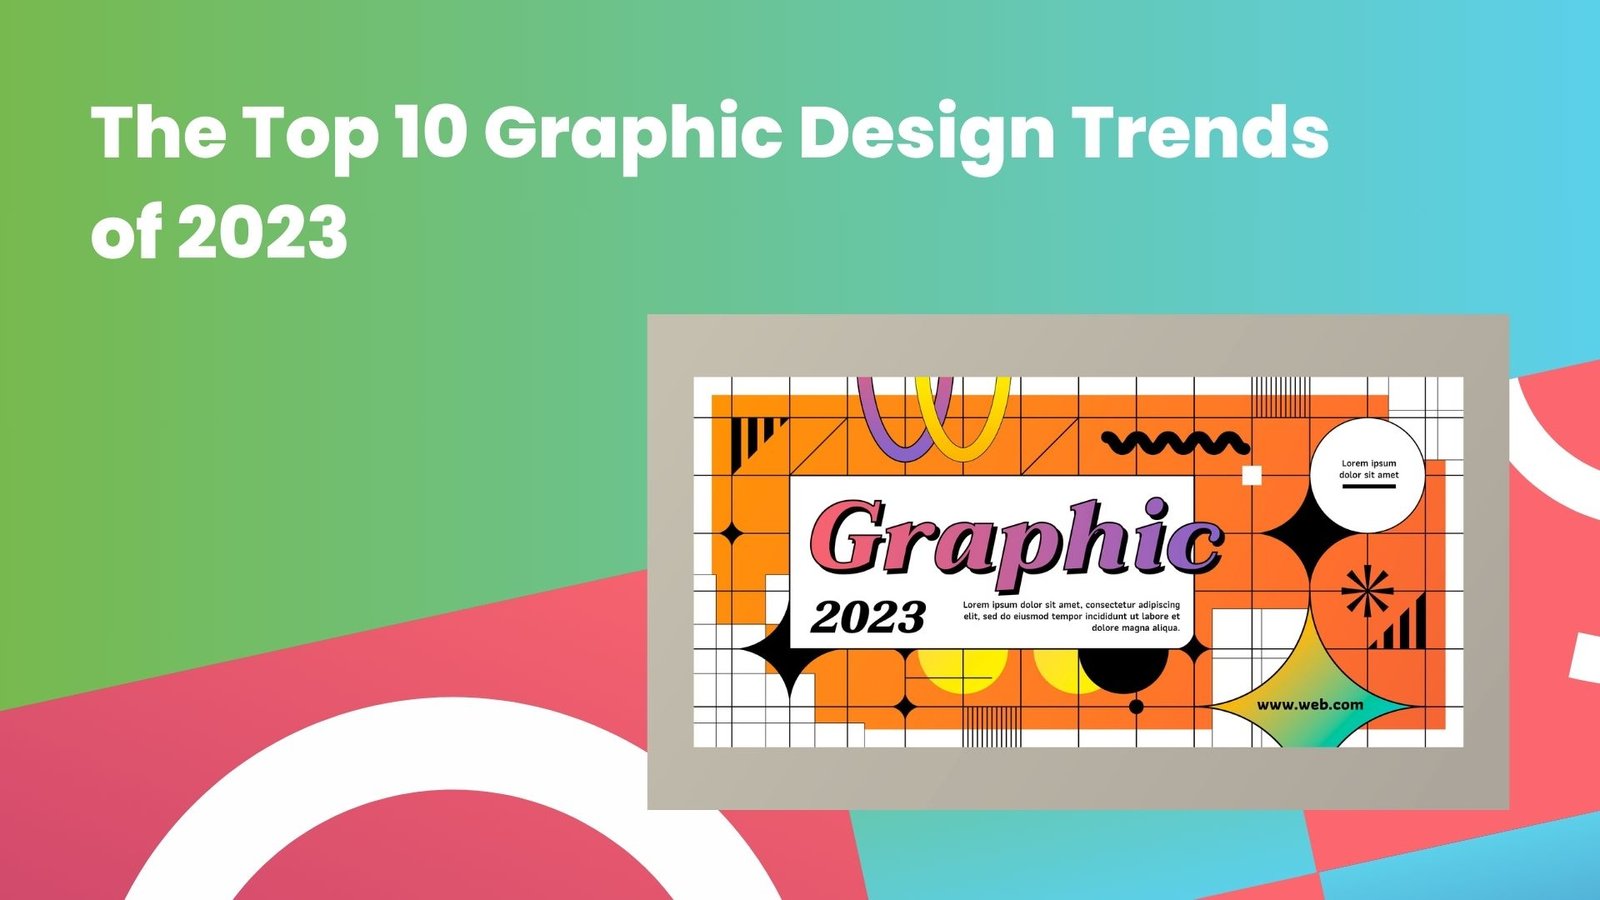 The top 10 graphic design trend of 2023